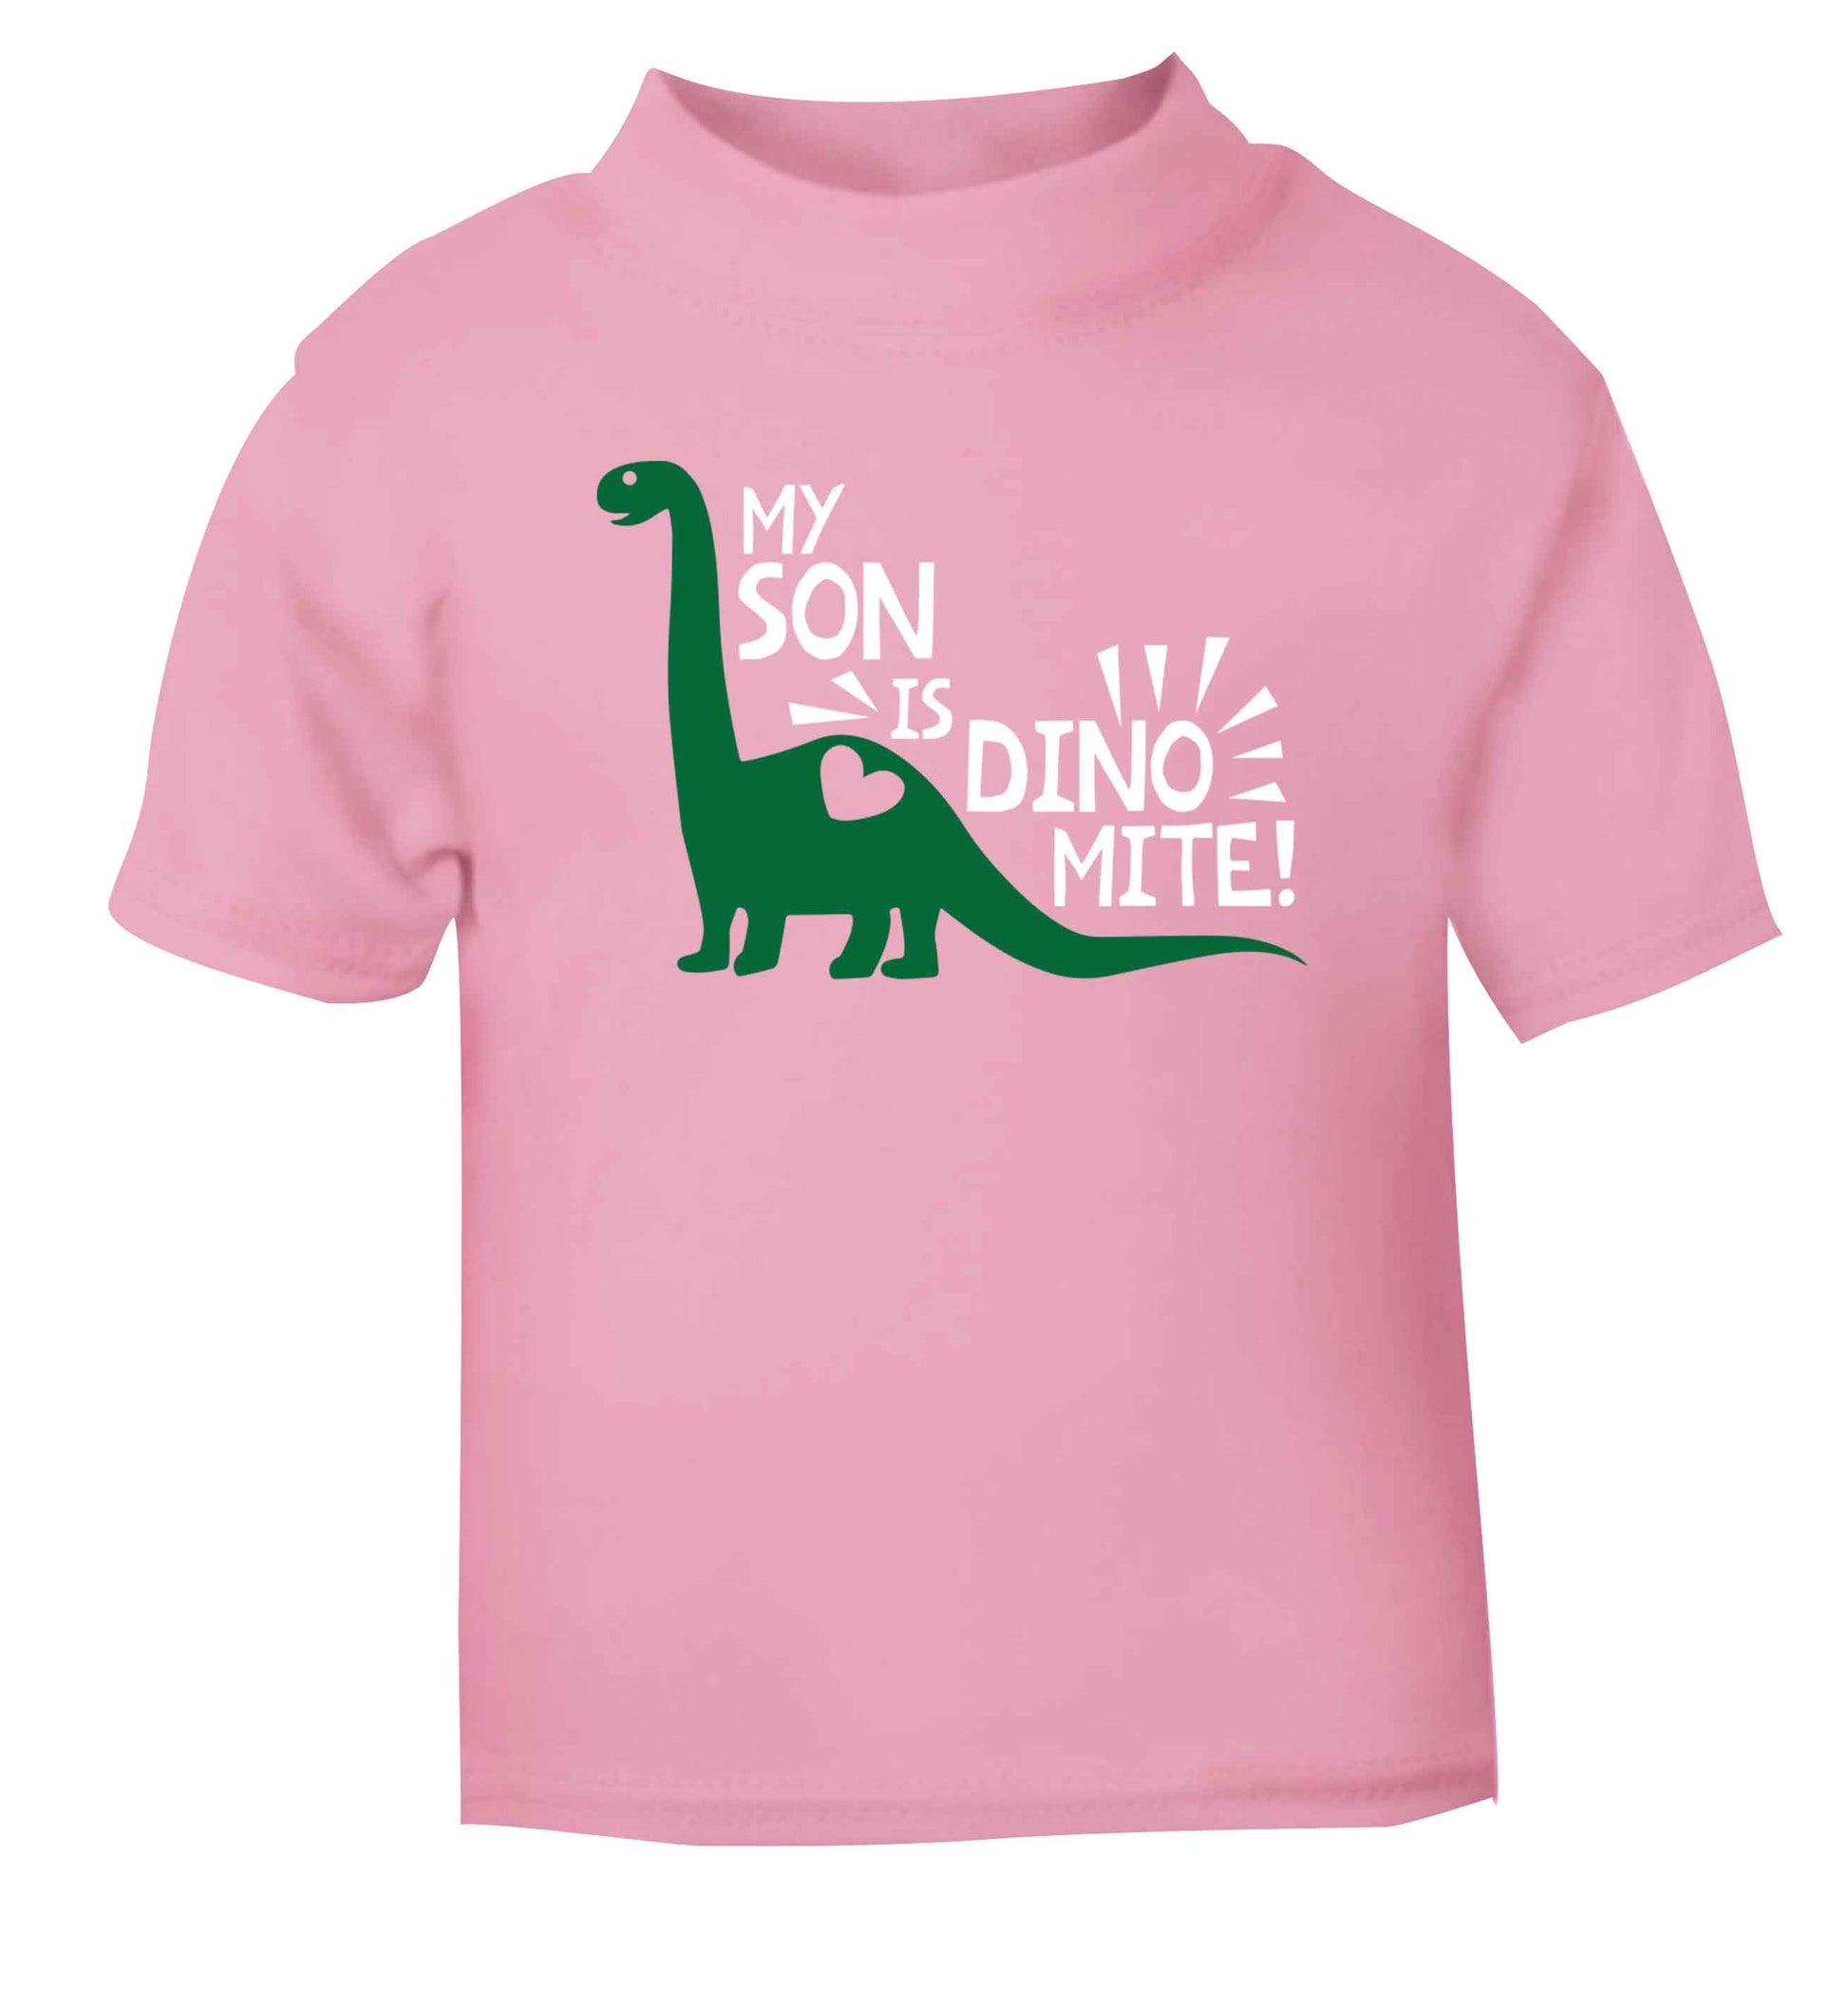 My son is dinomite! light pink Baby Toddler Tshirt 2 Years